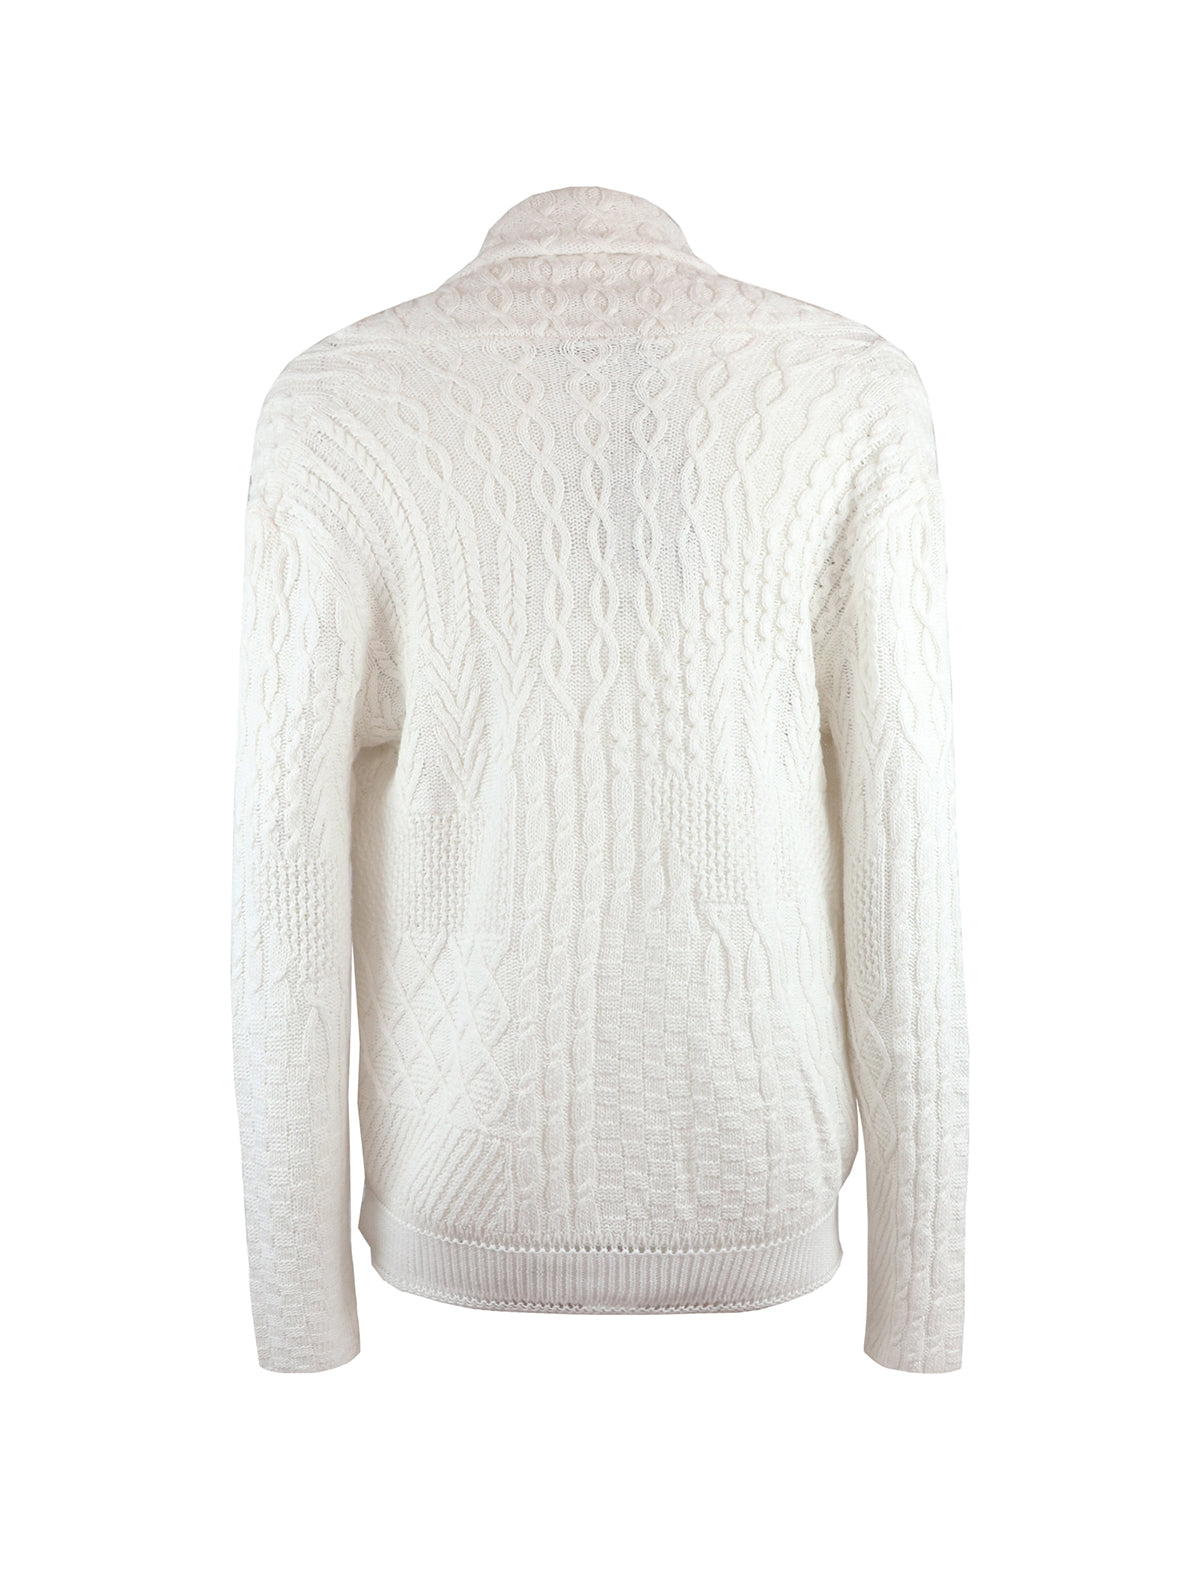 Gabriele Pasini Flax Cable Knit Cardigan in White